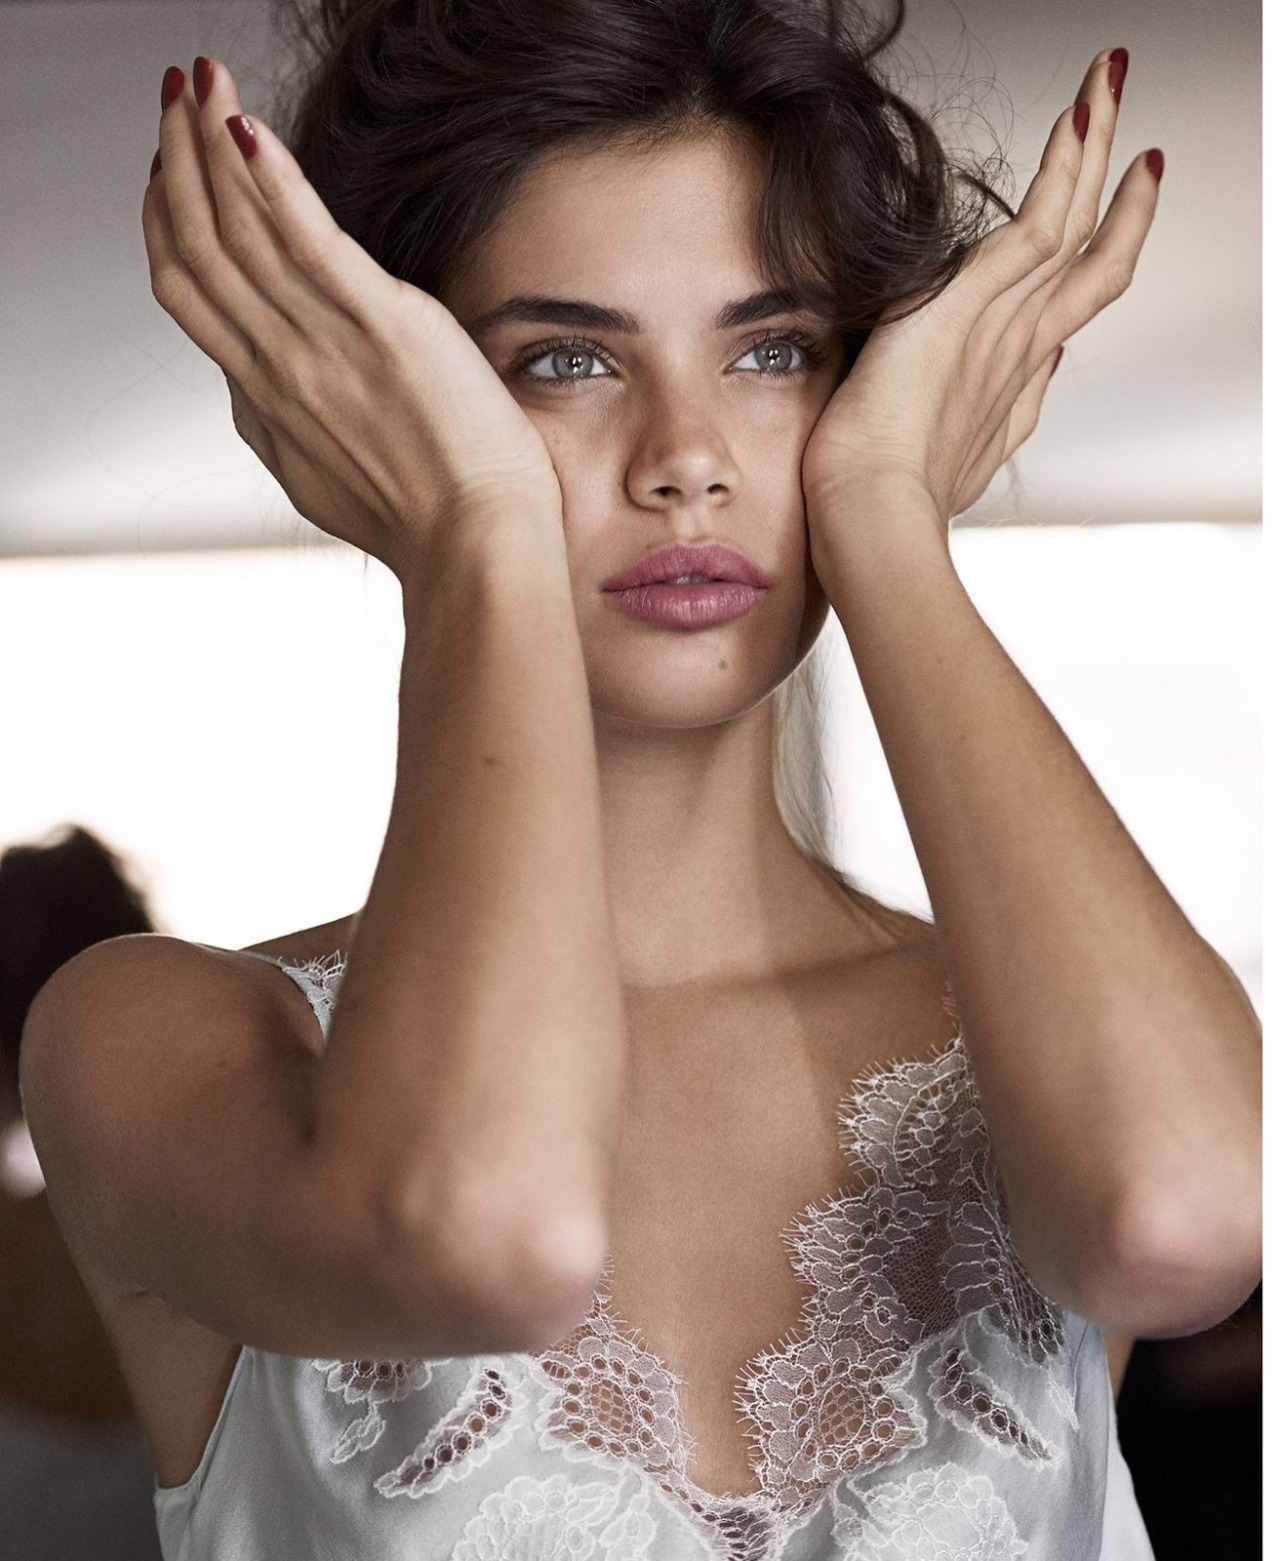 midnight-charm:  “Skin in the Game”Sara Sampaio photographed by Carter Smith